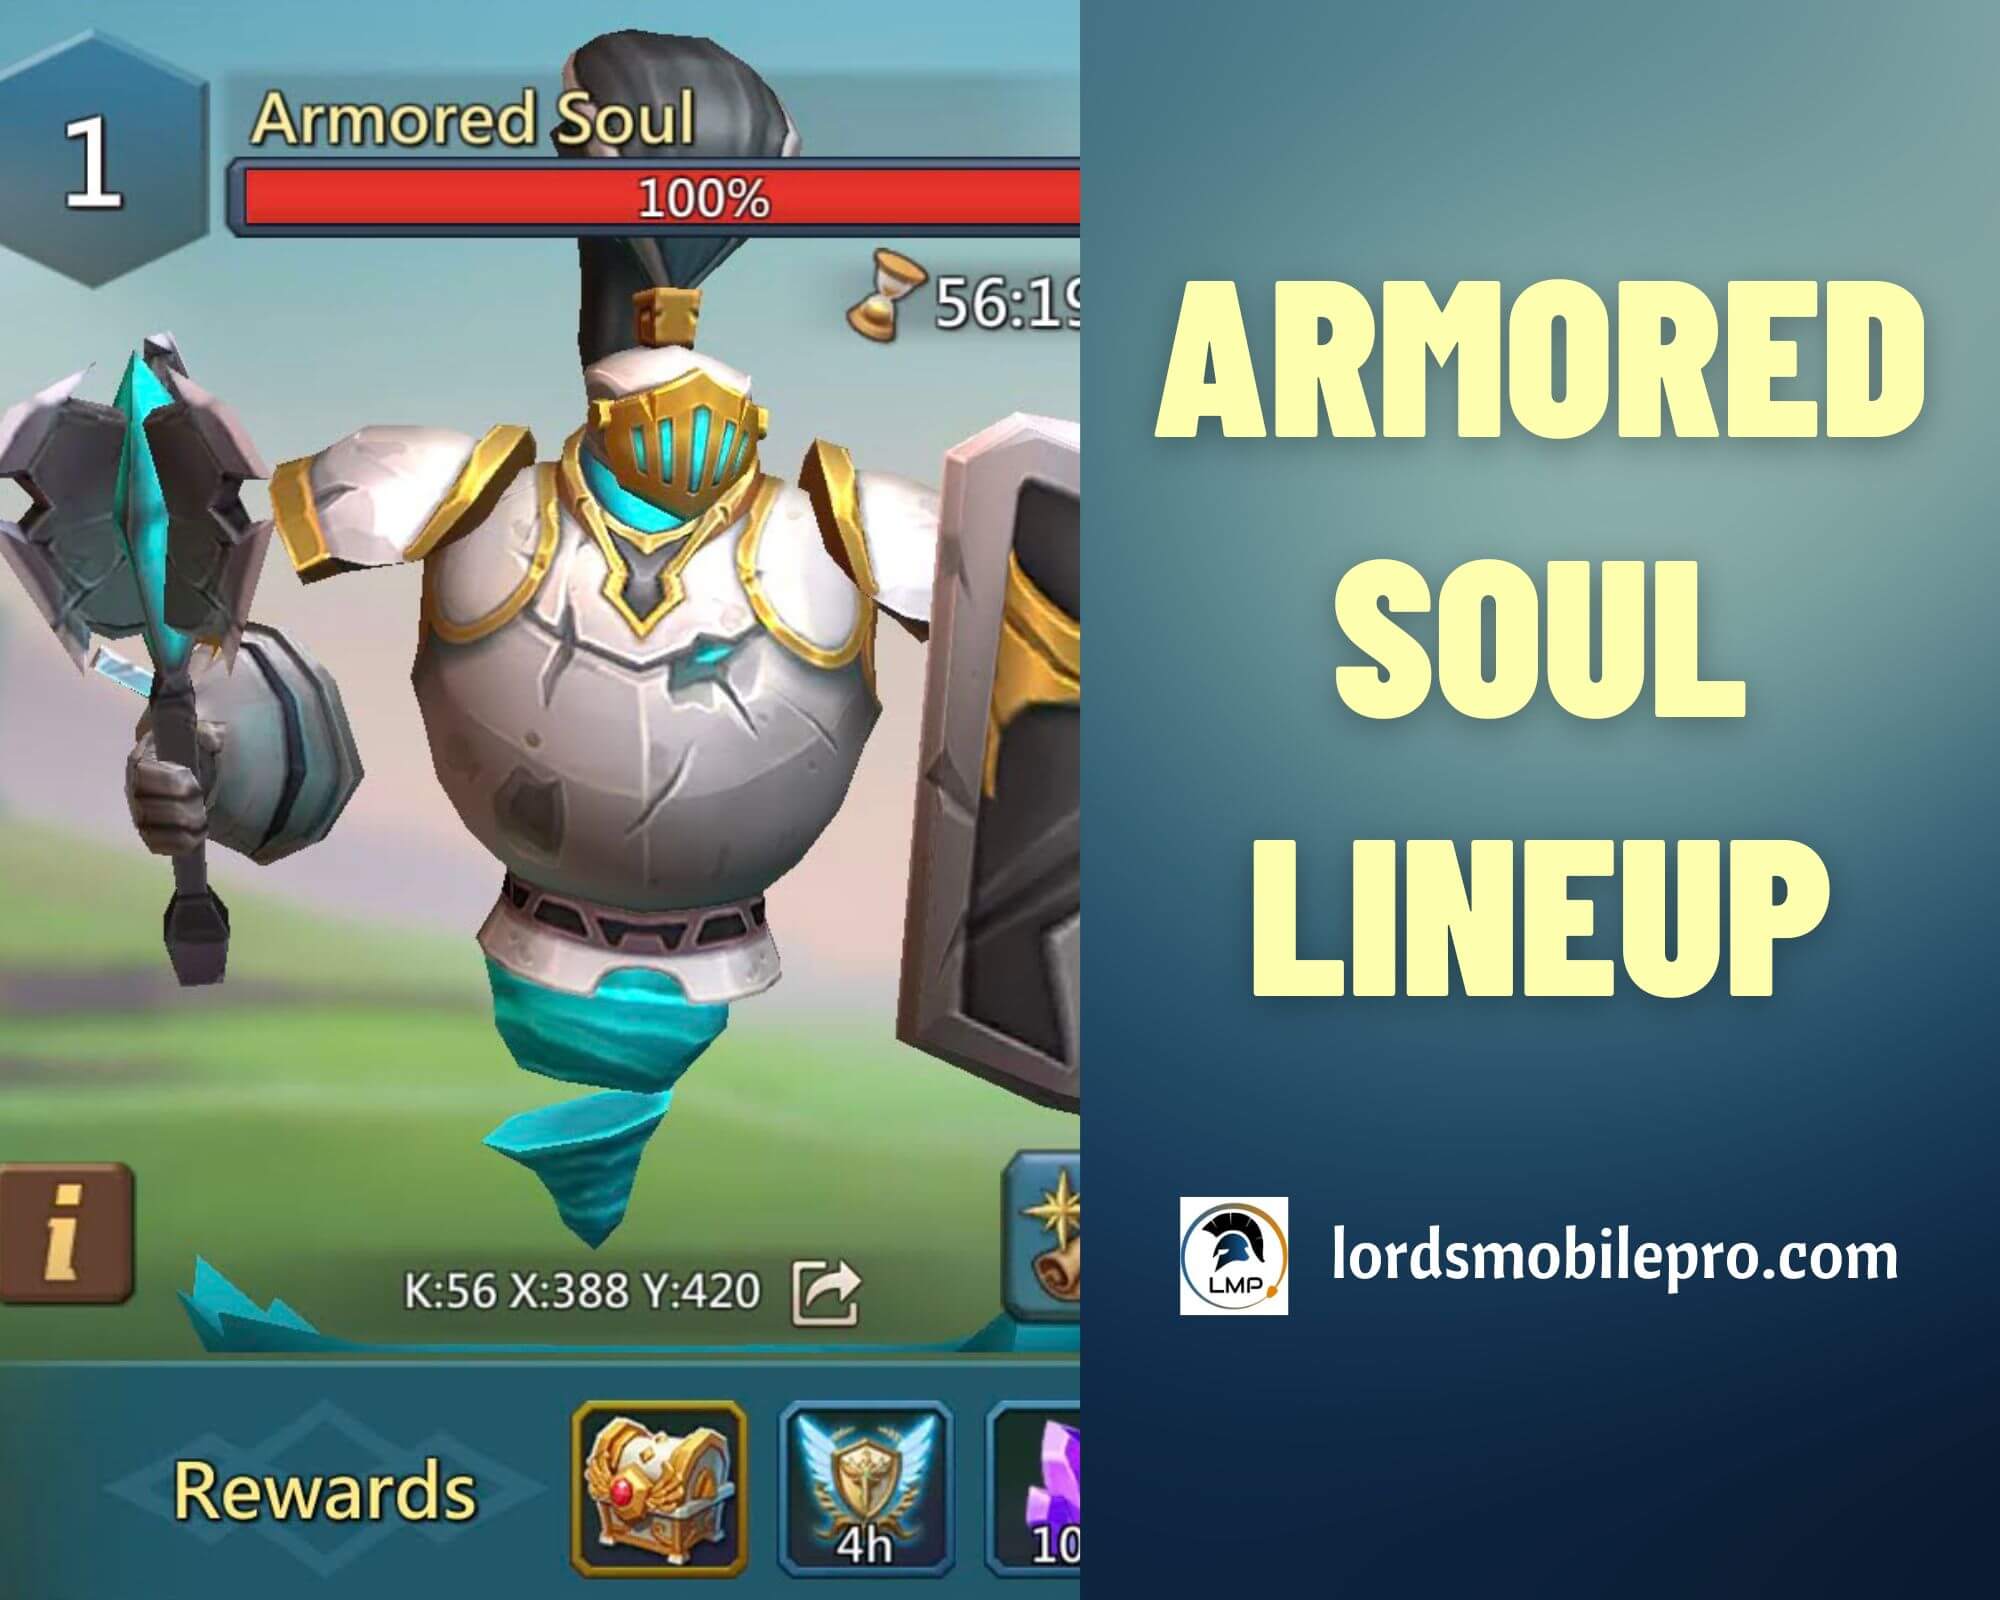 Lords Mobile NEW HERO SHIELD MAIDEN